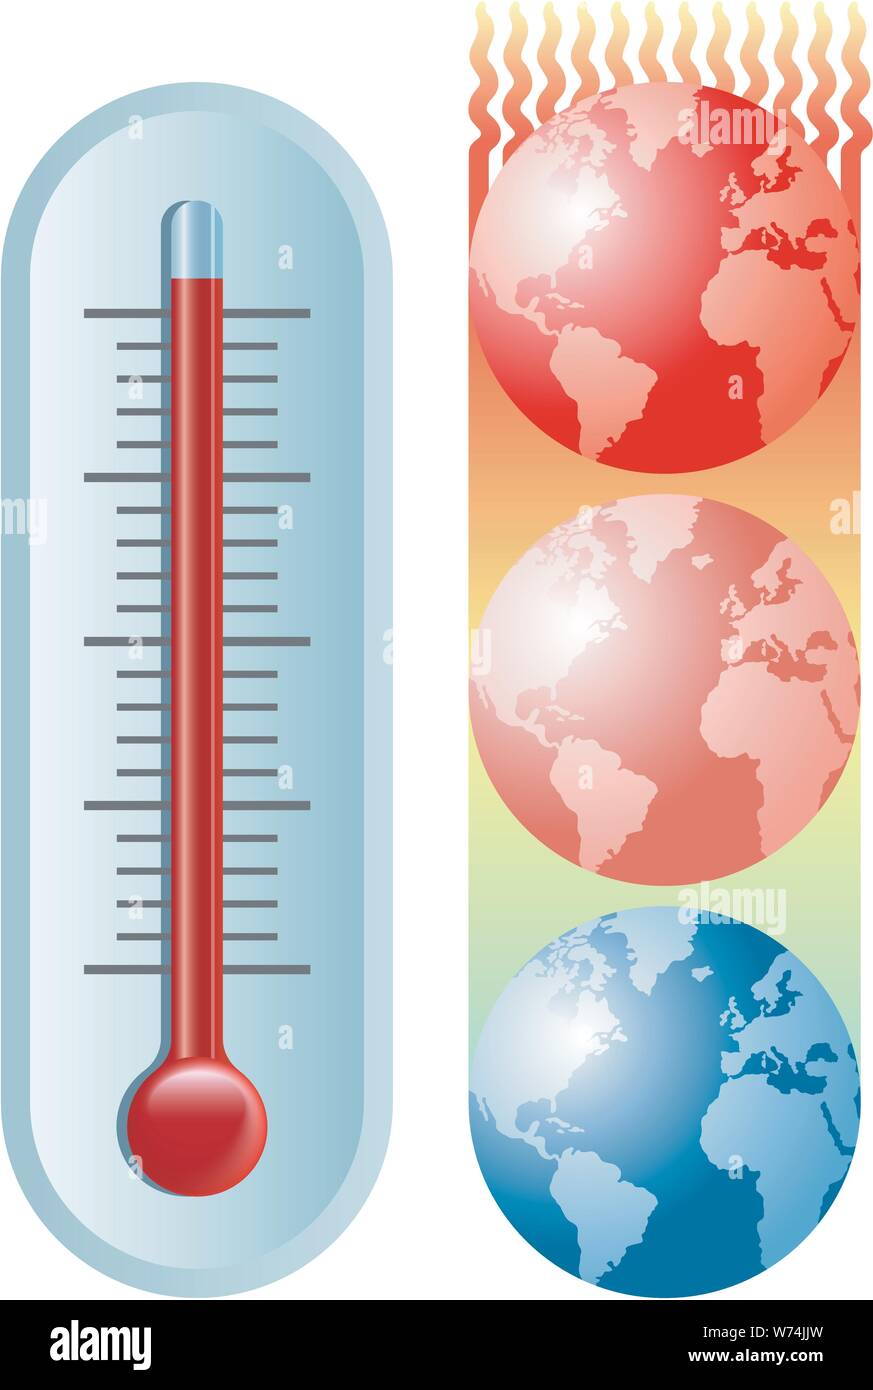 An illustration of a thermometer and the planet Earth moving towards hotter and hotter temperatures. Stock Vector